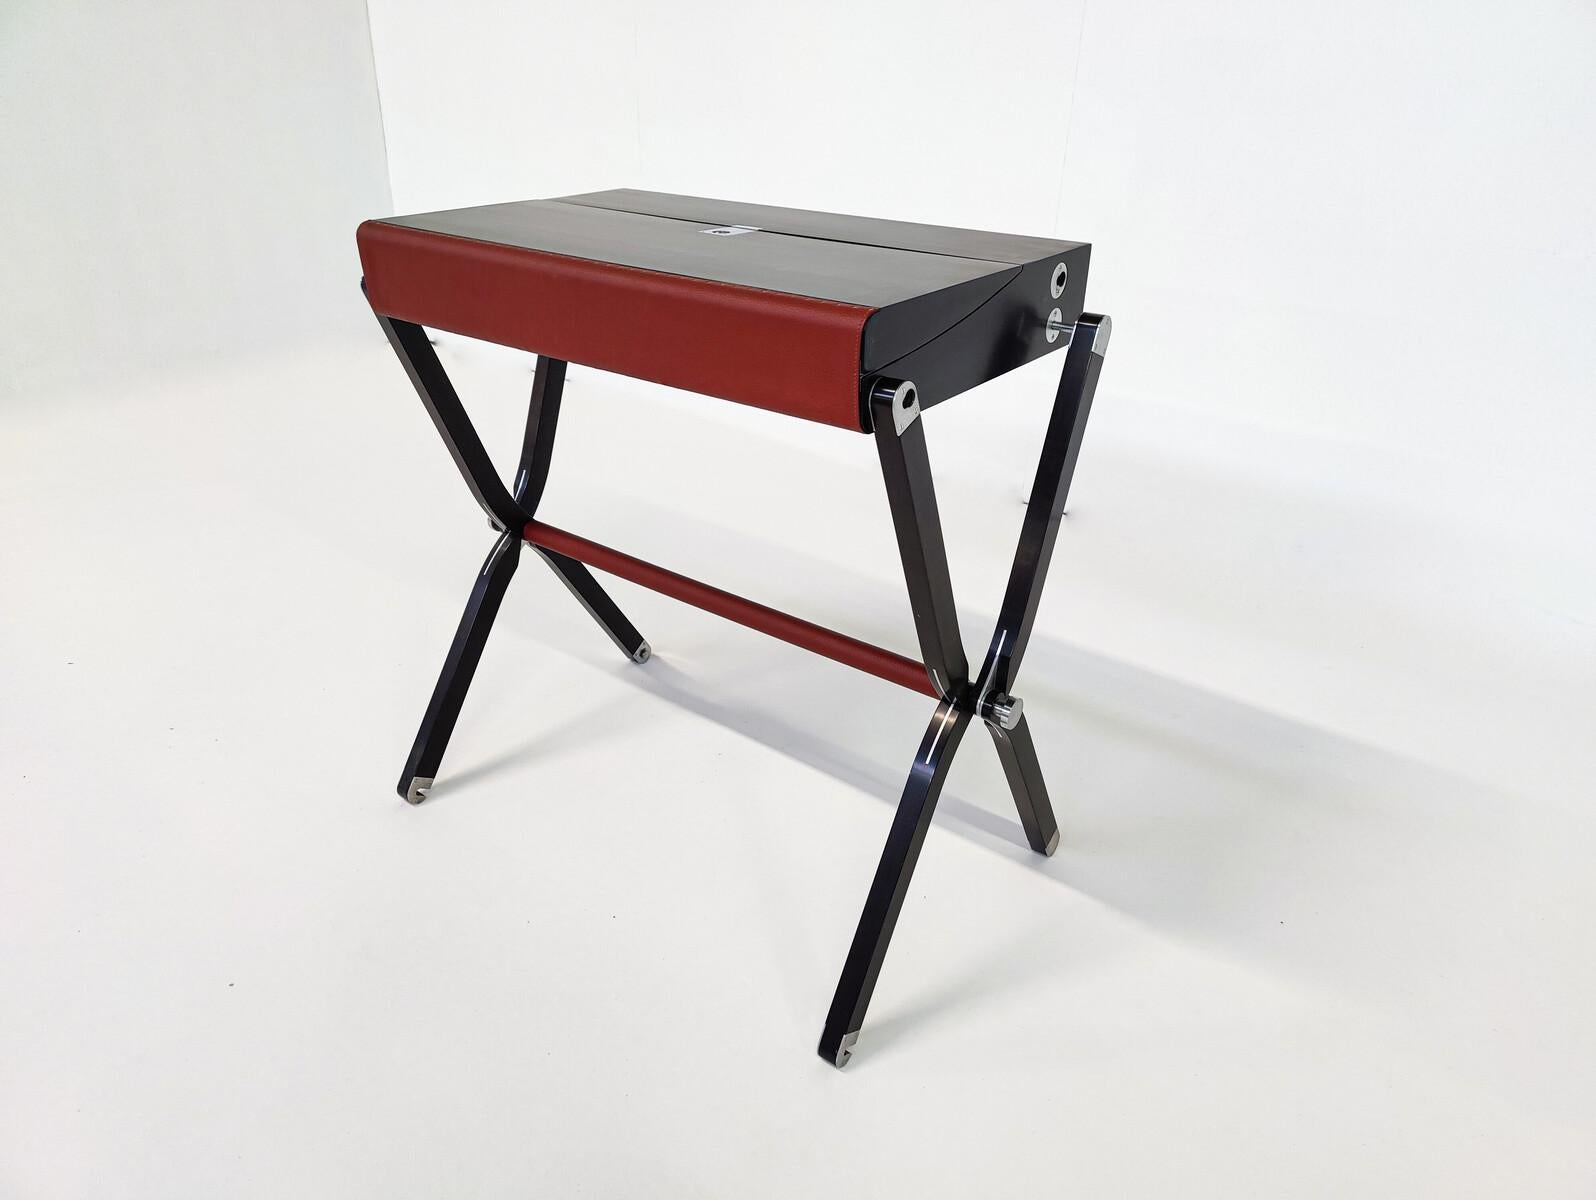 Pippa folding desk by Rena Dumas and Peter Coles for Hermes, 1980s.